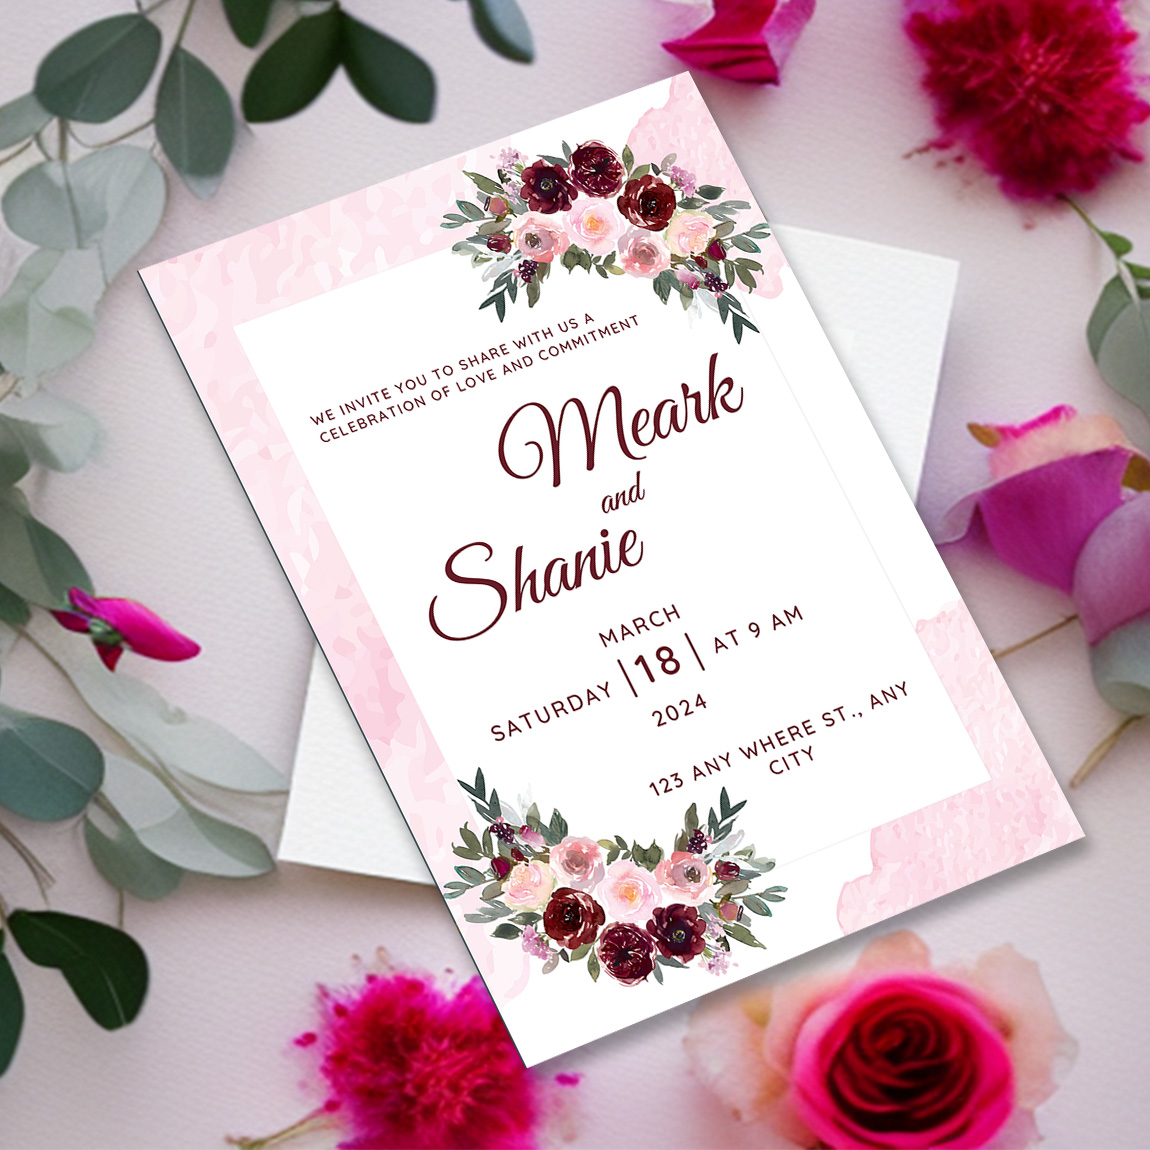 Image with beautiful wedding invitation in pink tone and flowers.